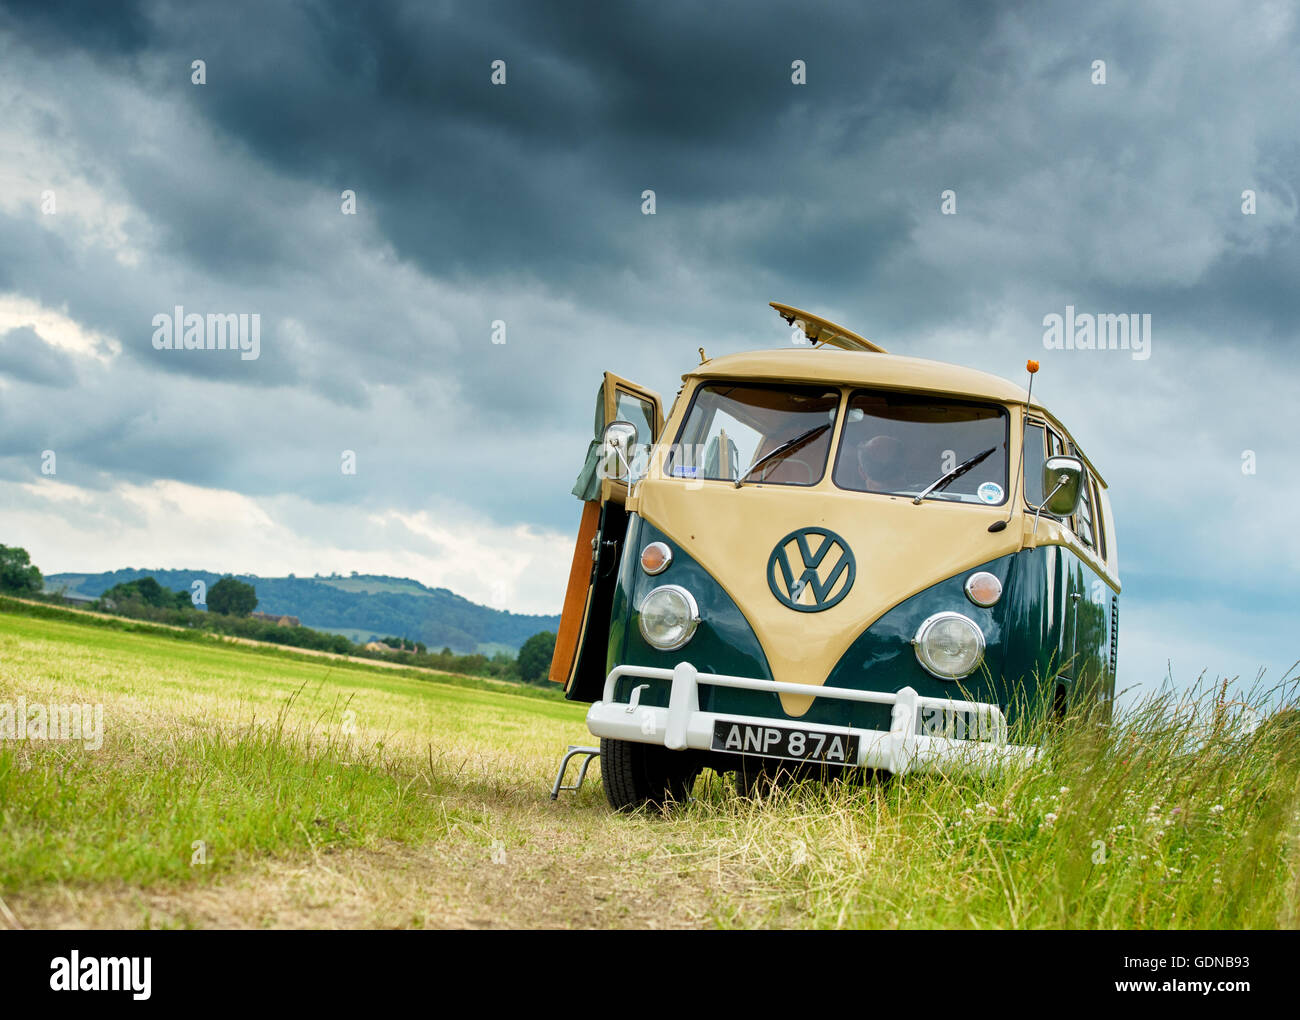 1963 VW Volkswagen split screen campervan parked in a field in the Cotswolds. UK. HDR Stock Photo